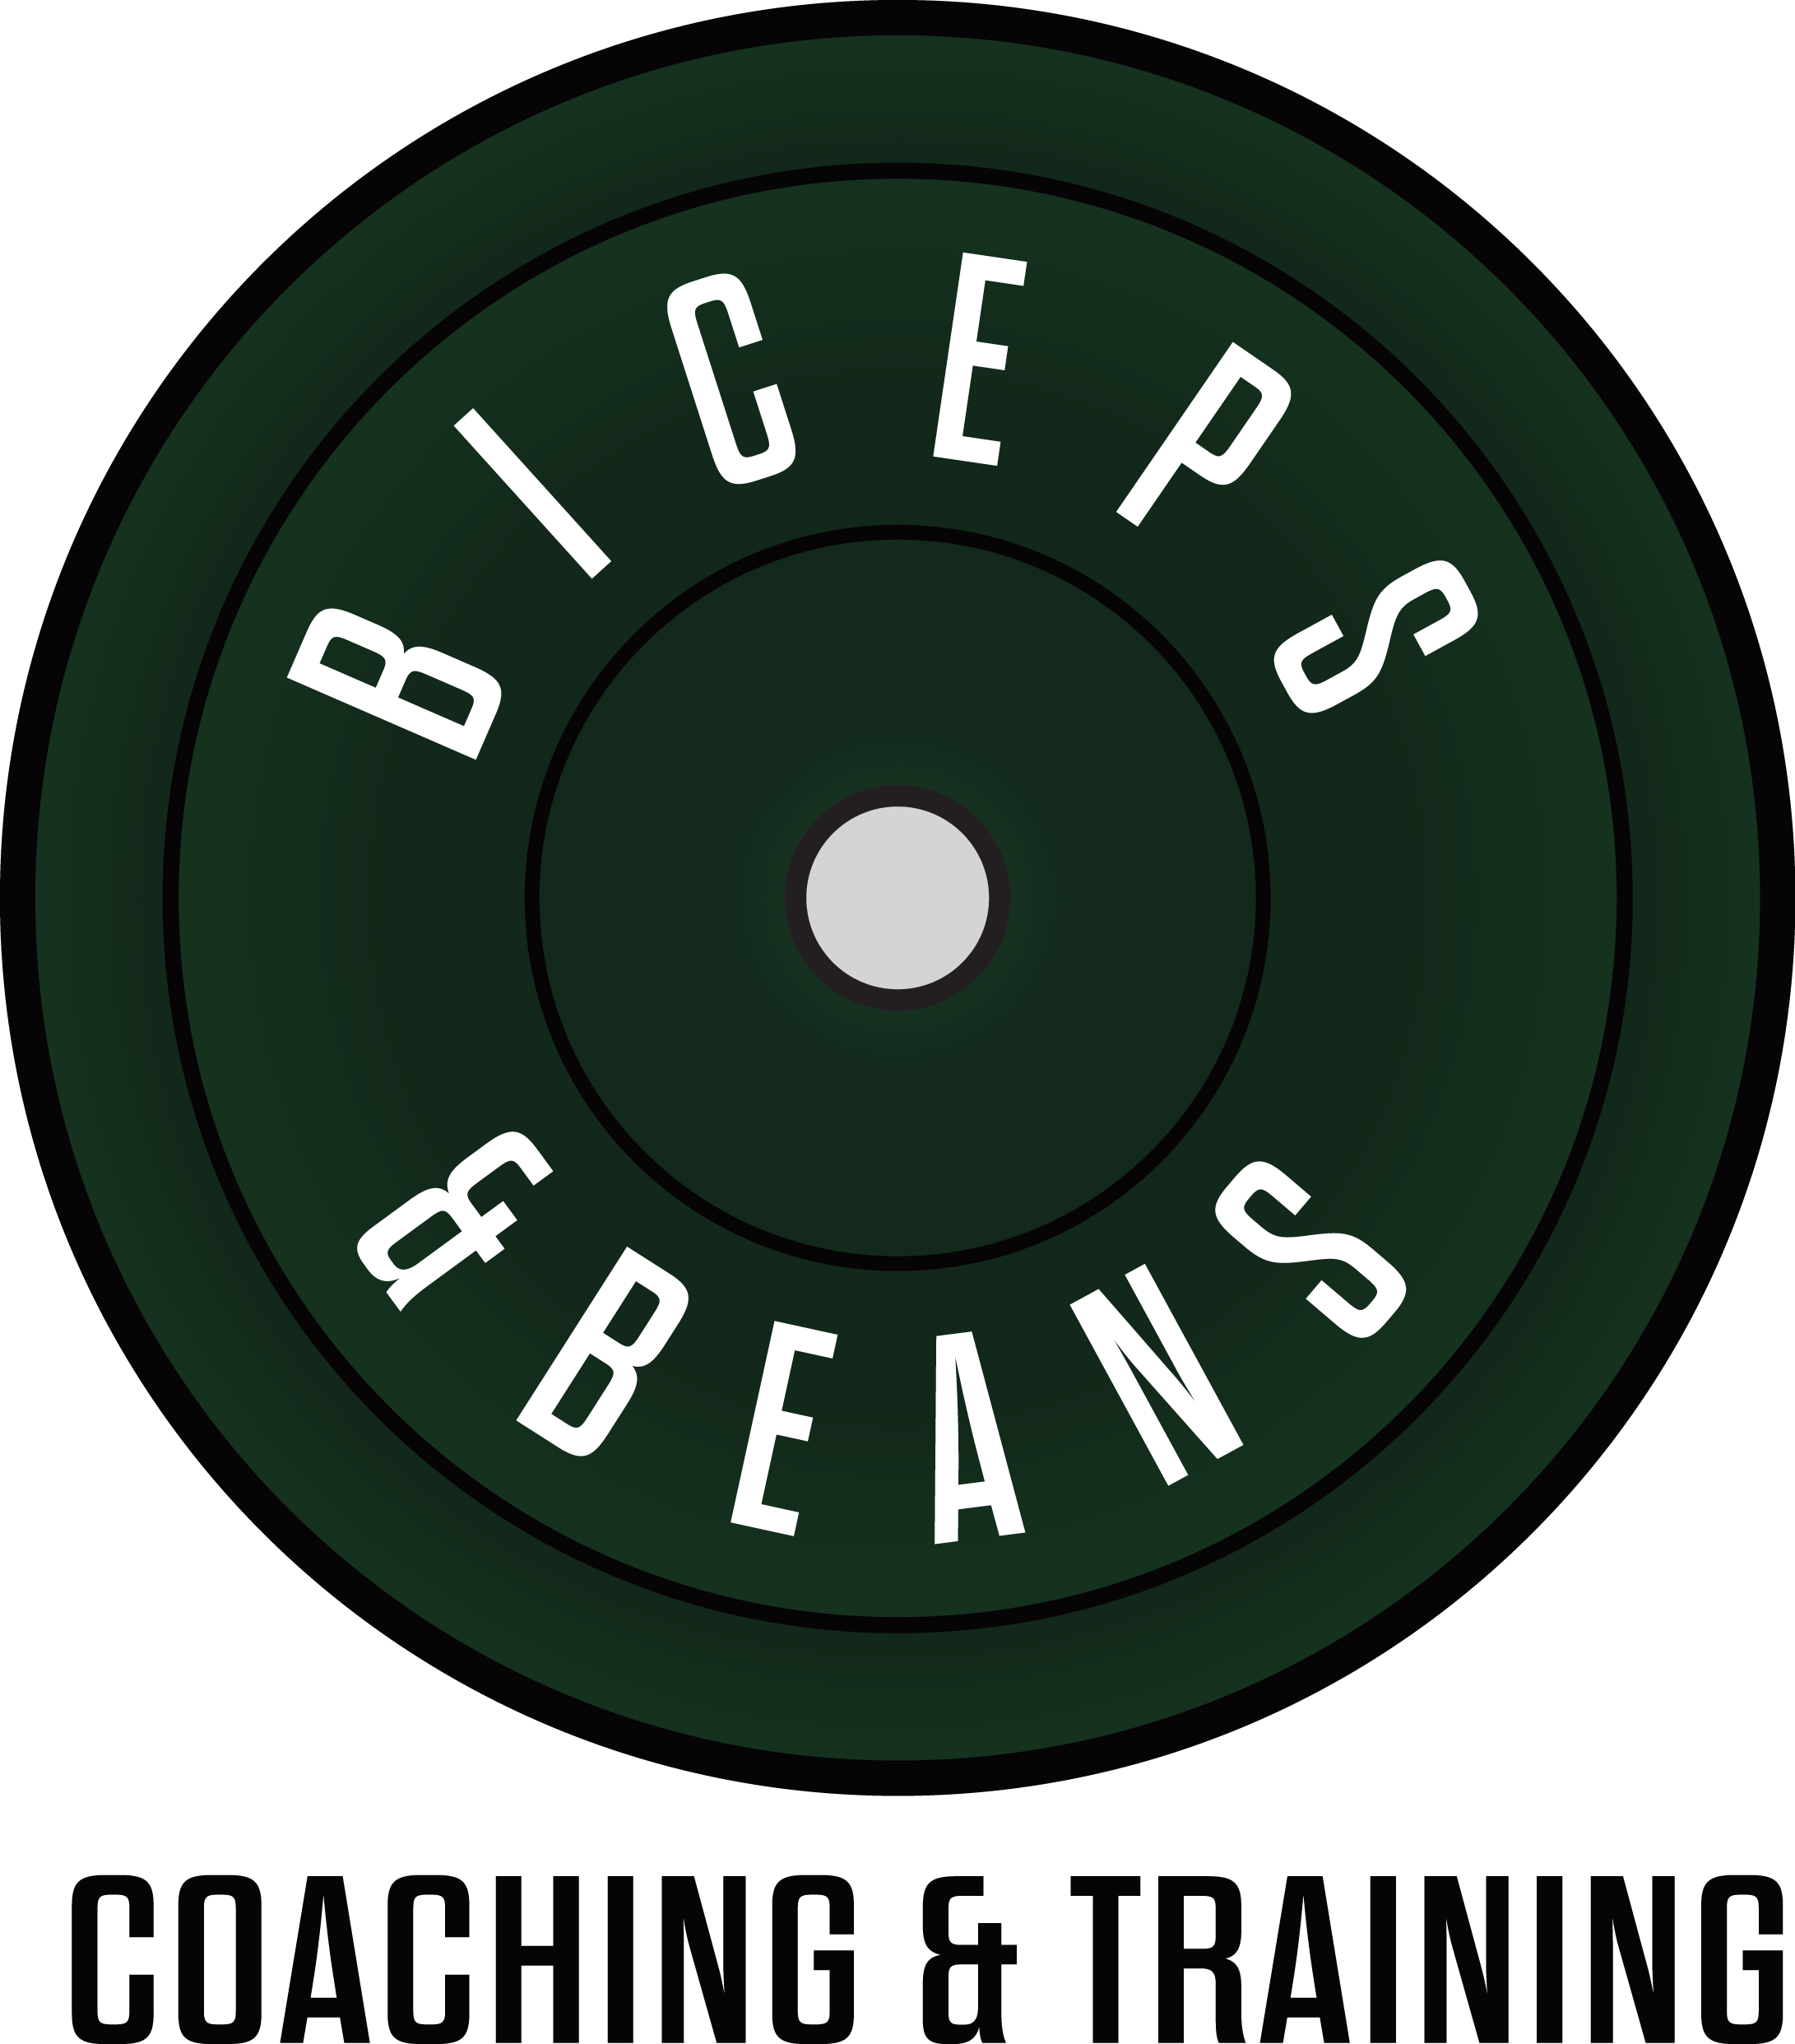 Biceps and Beans